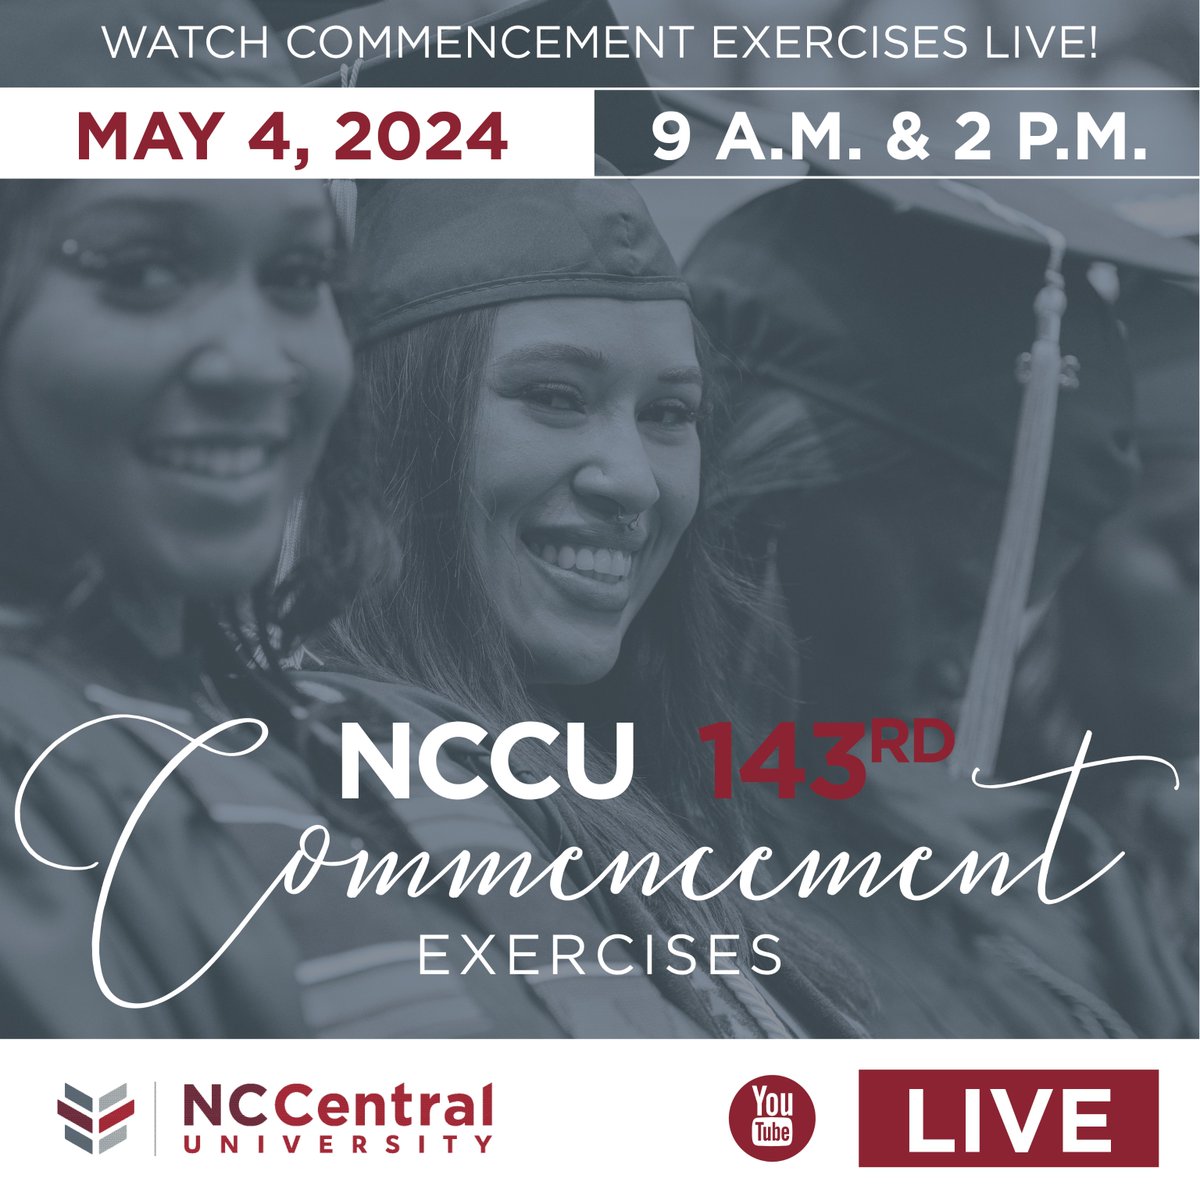 #NCCUCommencement | Commencement ceremonies for undergraduate and graduate/professional students will take place on Saturday, May 4, 2024. If you are unable to attend in person, watch the event as it happens on YouTube at bit.ly/NCCUYouTubeLive. DETAILS: nccu.edu/143Commencement